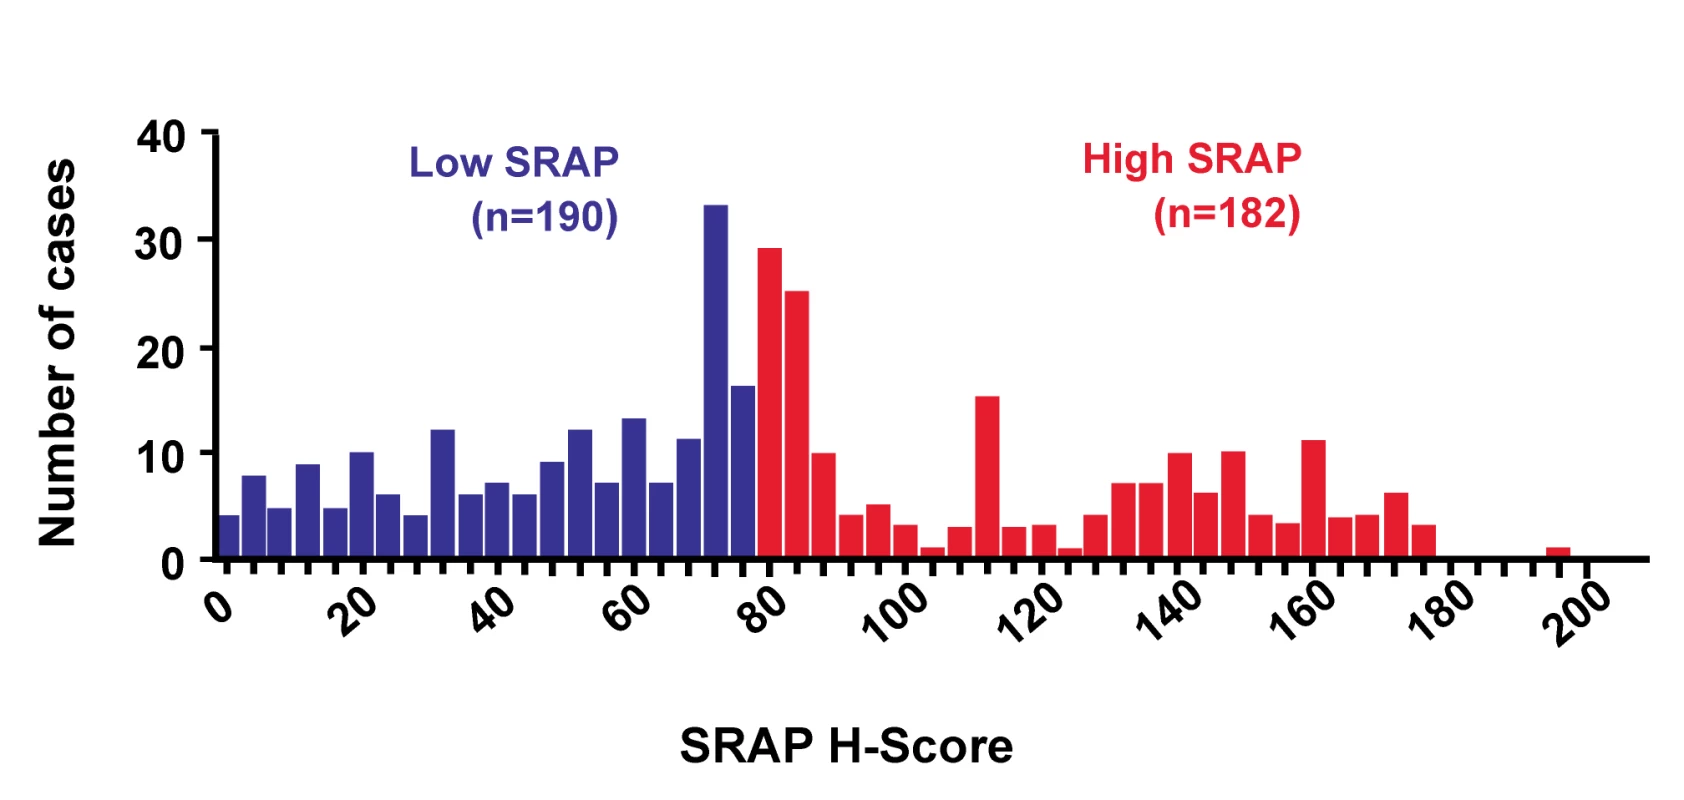 Frequency distribution of Steroid Receptor RNA Activator Protein (SRAP) H-scores in 372 breast tumors, showing median of 76.67 used to delineate low and high subgroups &lt;em class=&quot;ref&quot;&gt;[&lt;b&gt;179&lt;/b&gt;]&lt;/em&gt; (for a secondary example see Figure 1 in &lt;em class=&quot;ref&quot;&gt;[&lt;b&gt;29&lt;/b&gt;]&lt;/em&gt;).